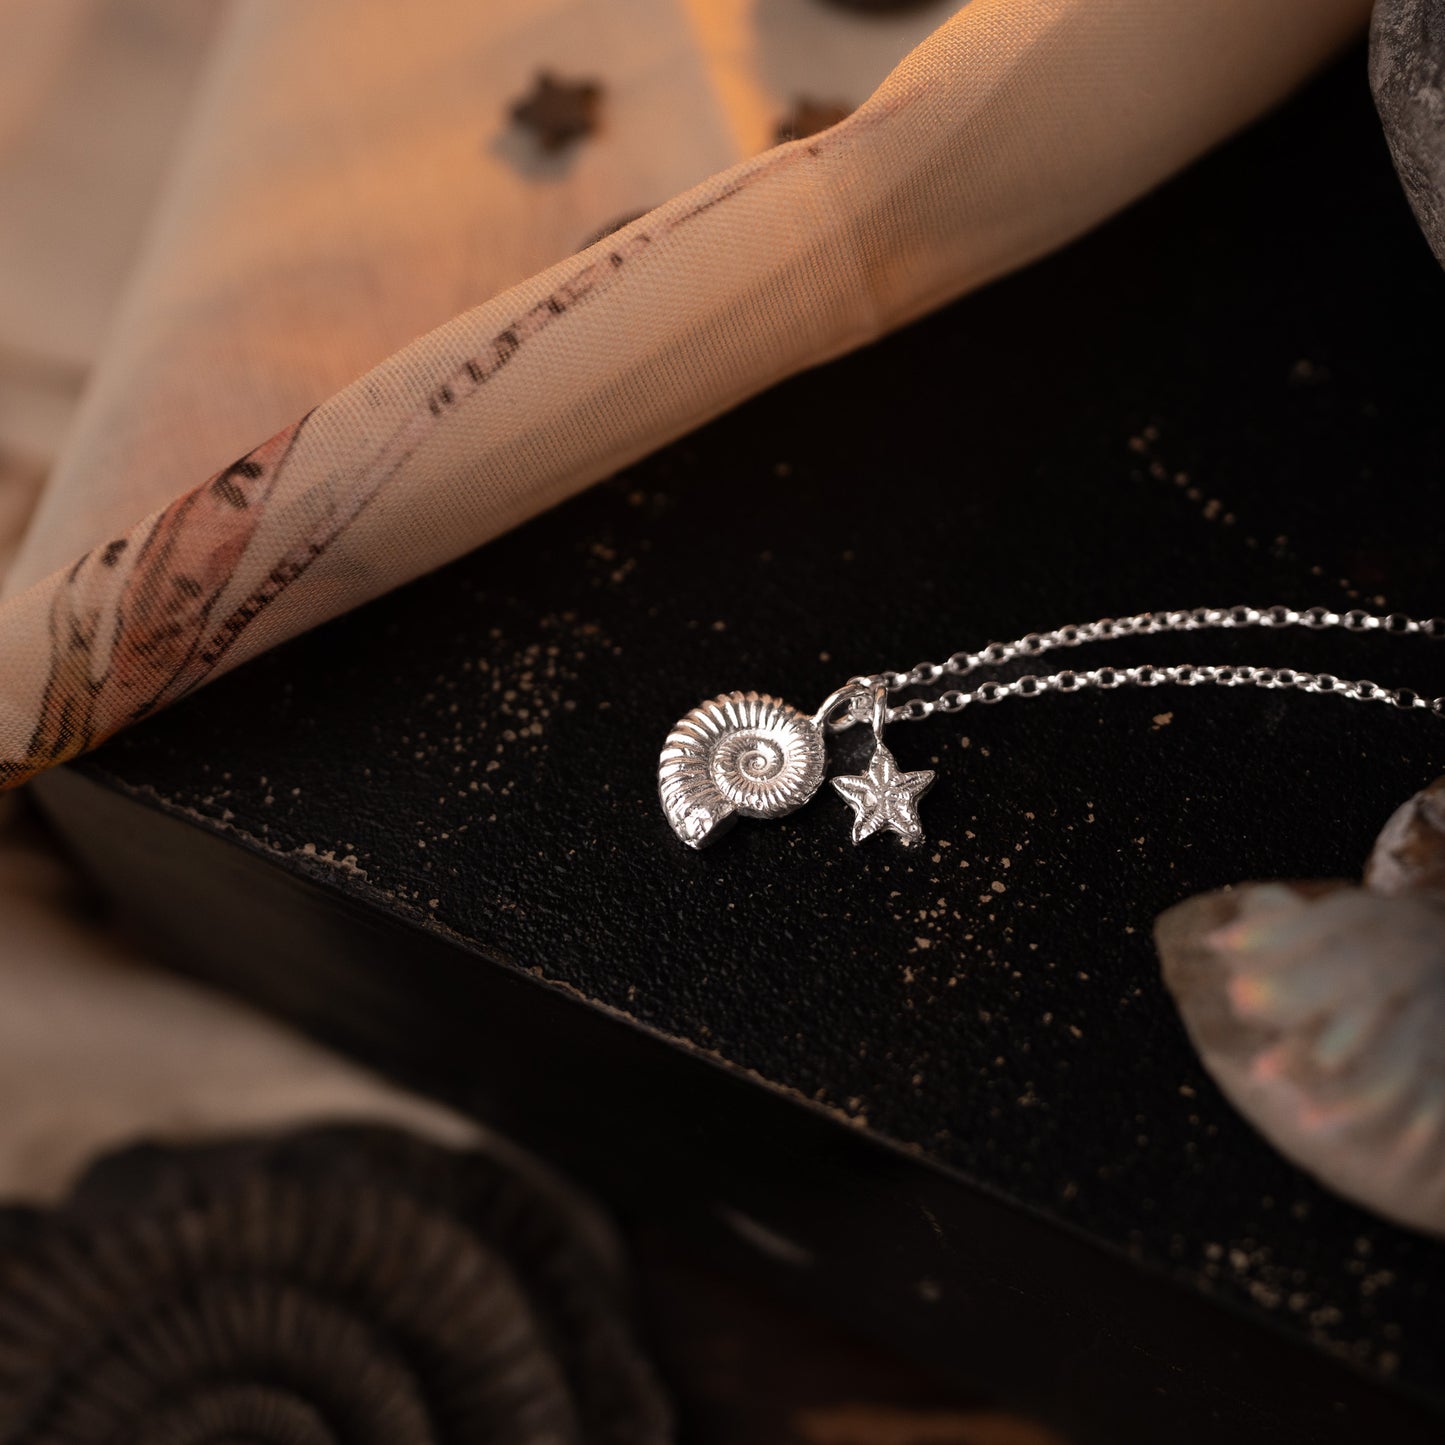 Sterling Silver Ammonite and Crinoid Fossil Charm Necklace